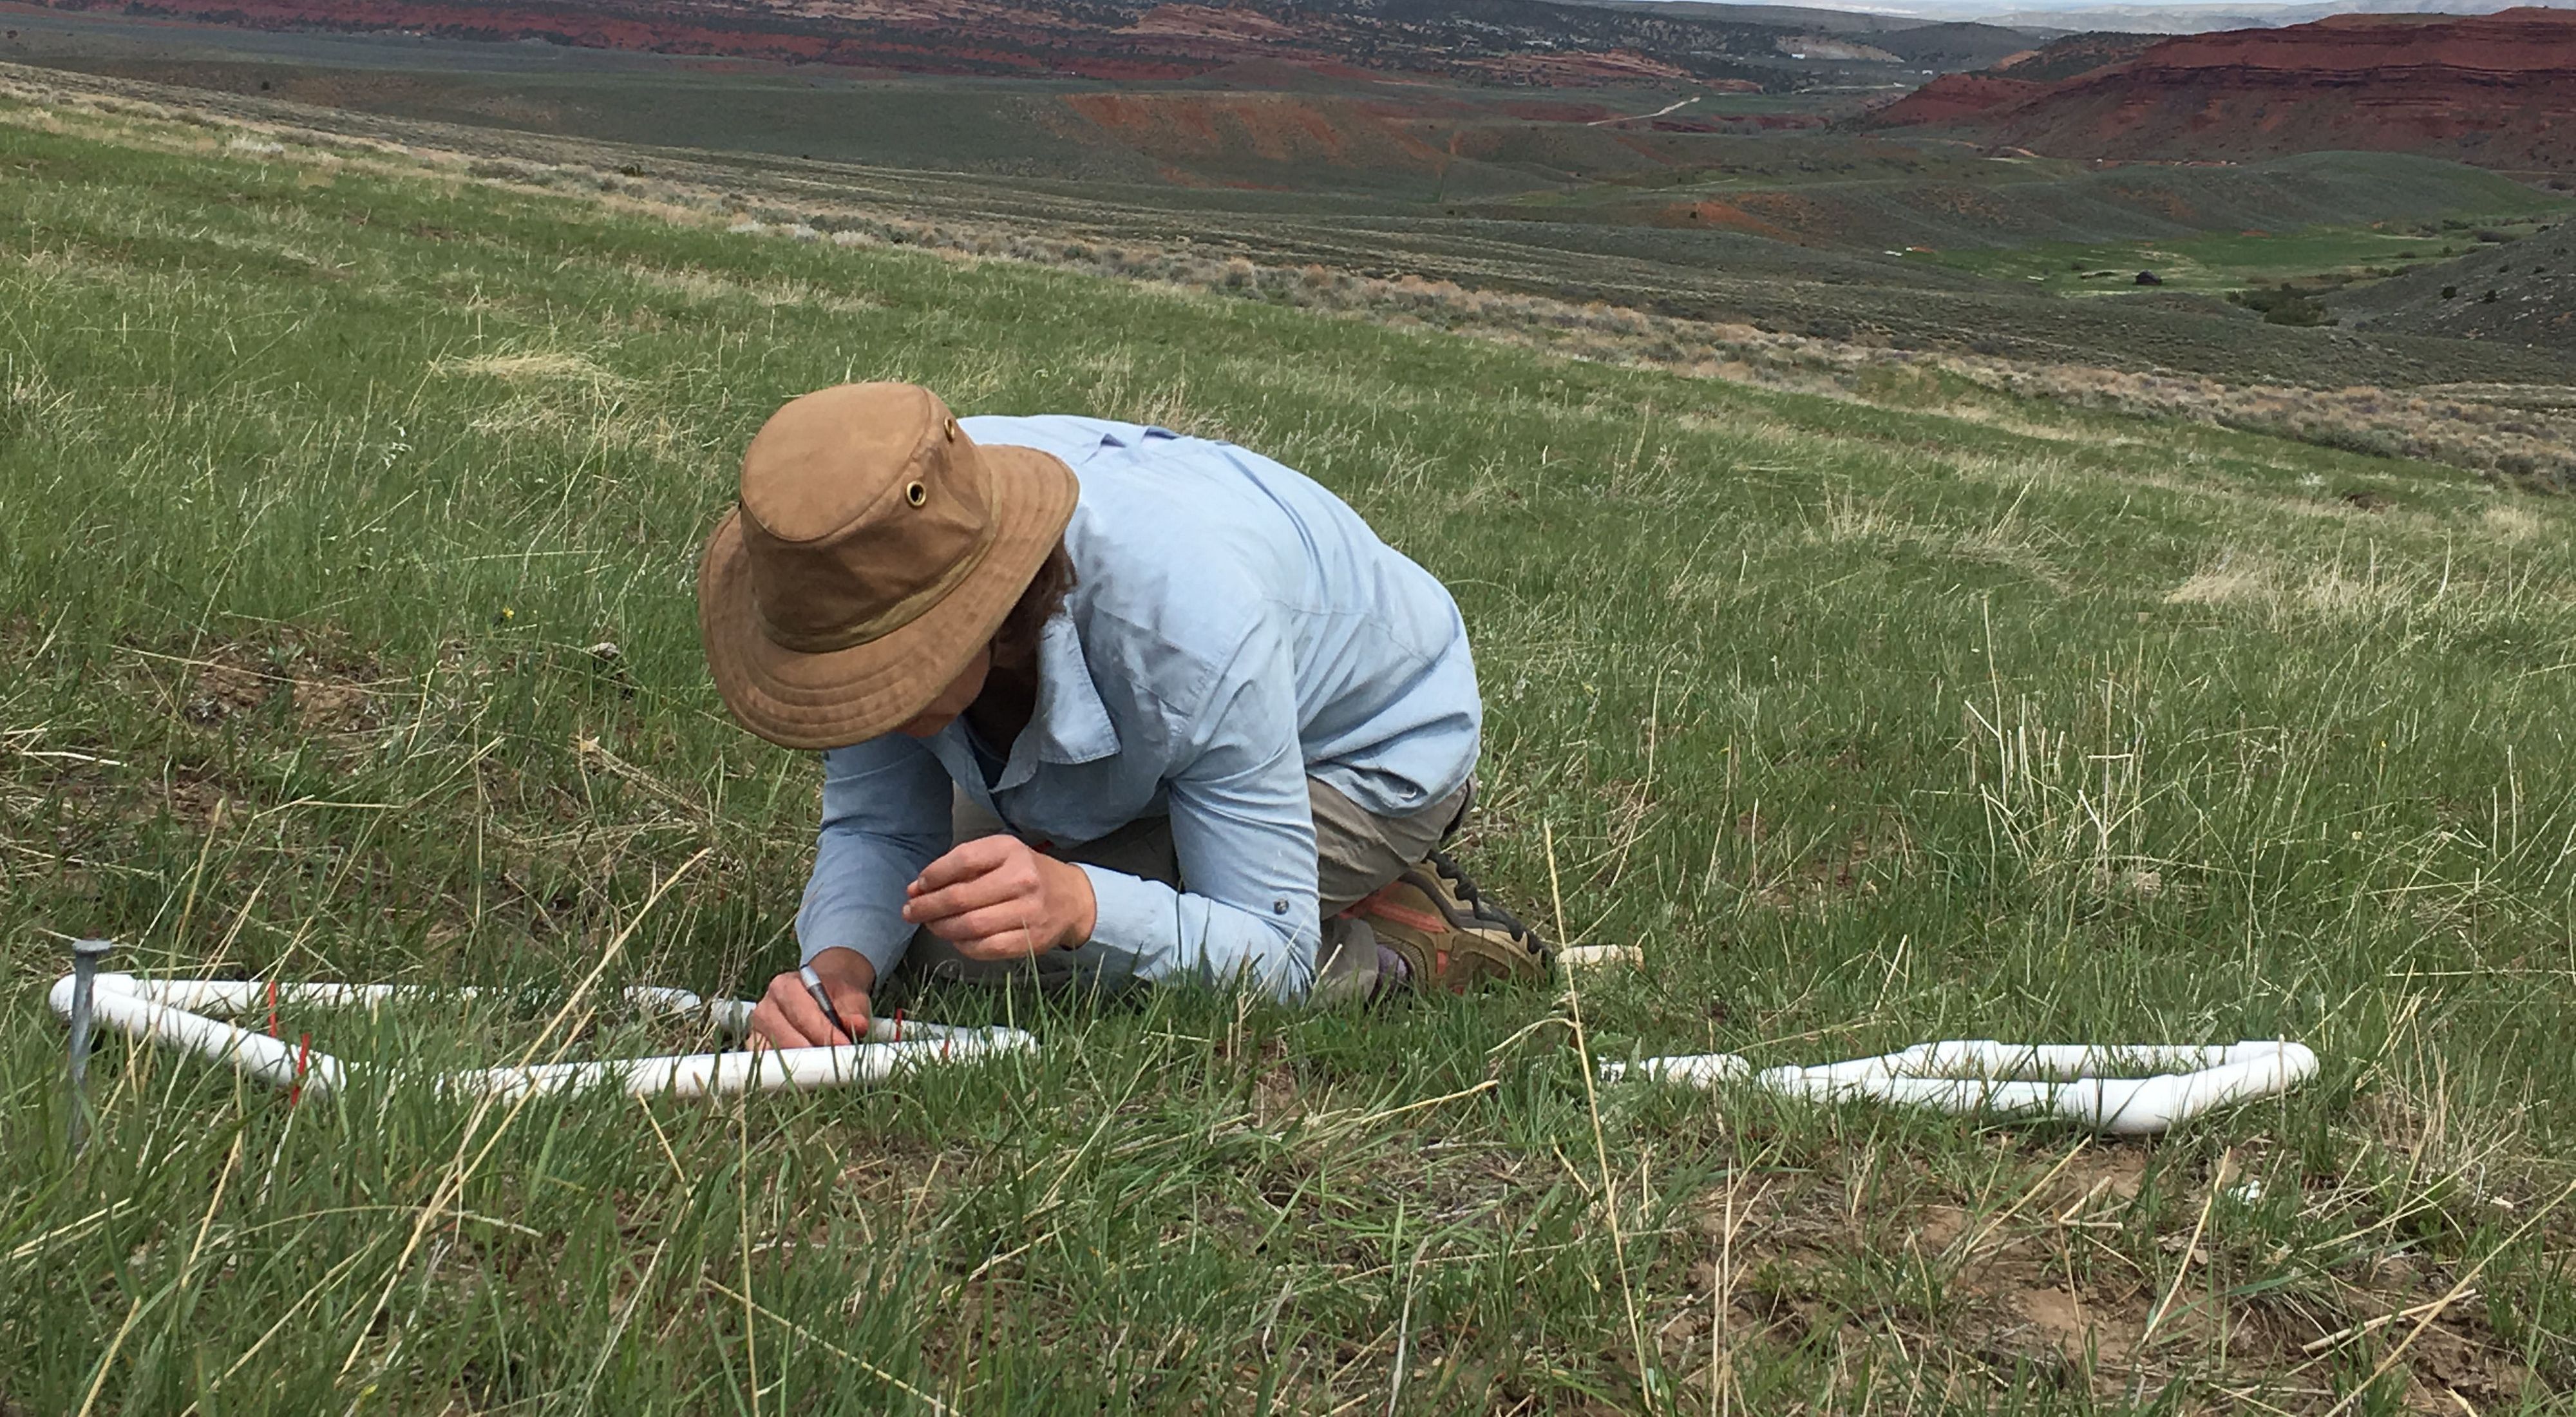 Person in a field, kneeling over a square frame made of PVC pipe and studying grasses.